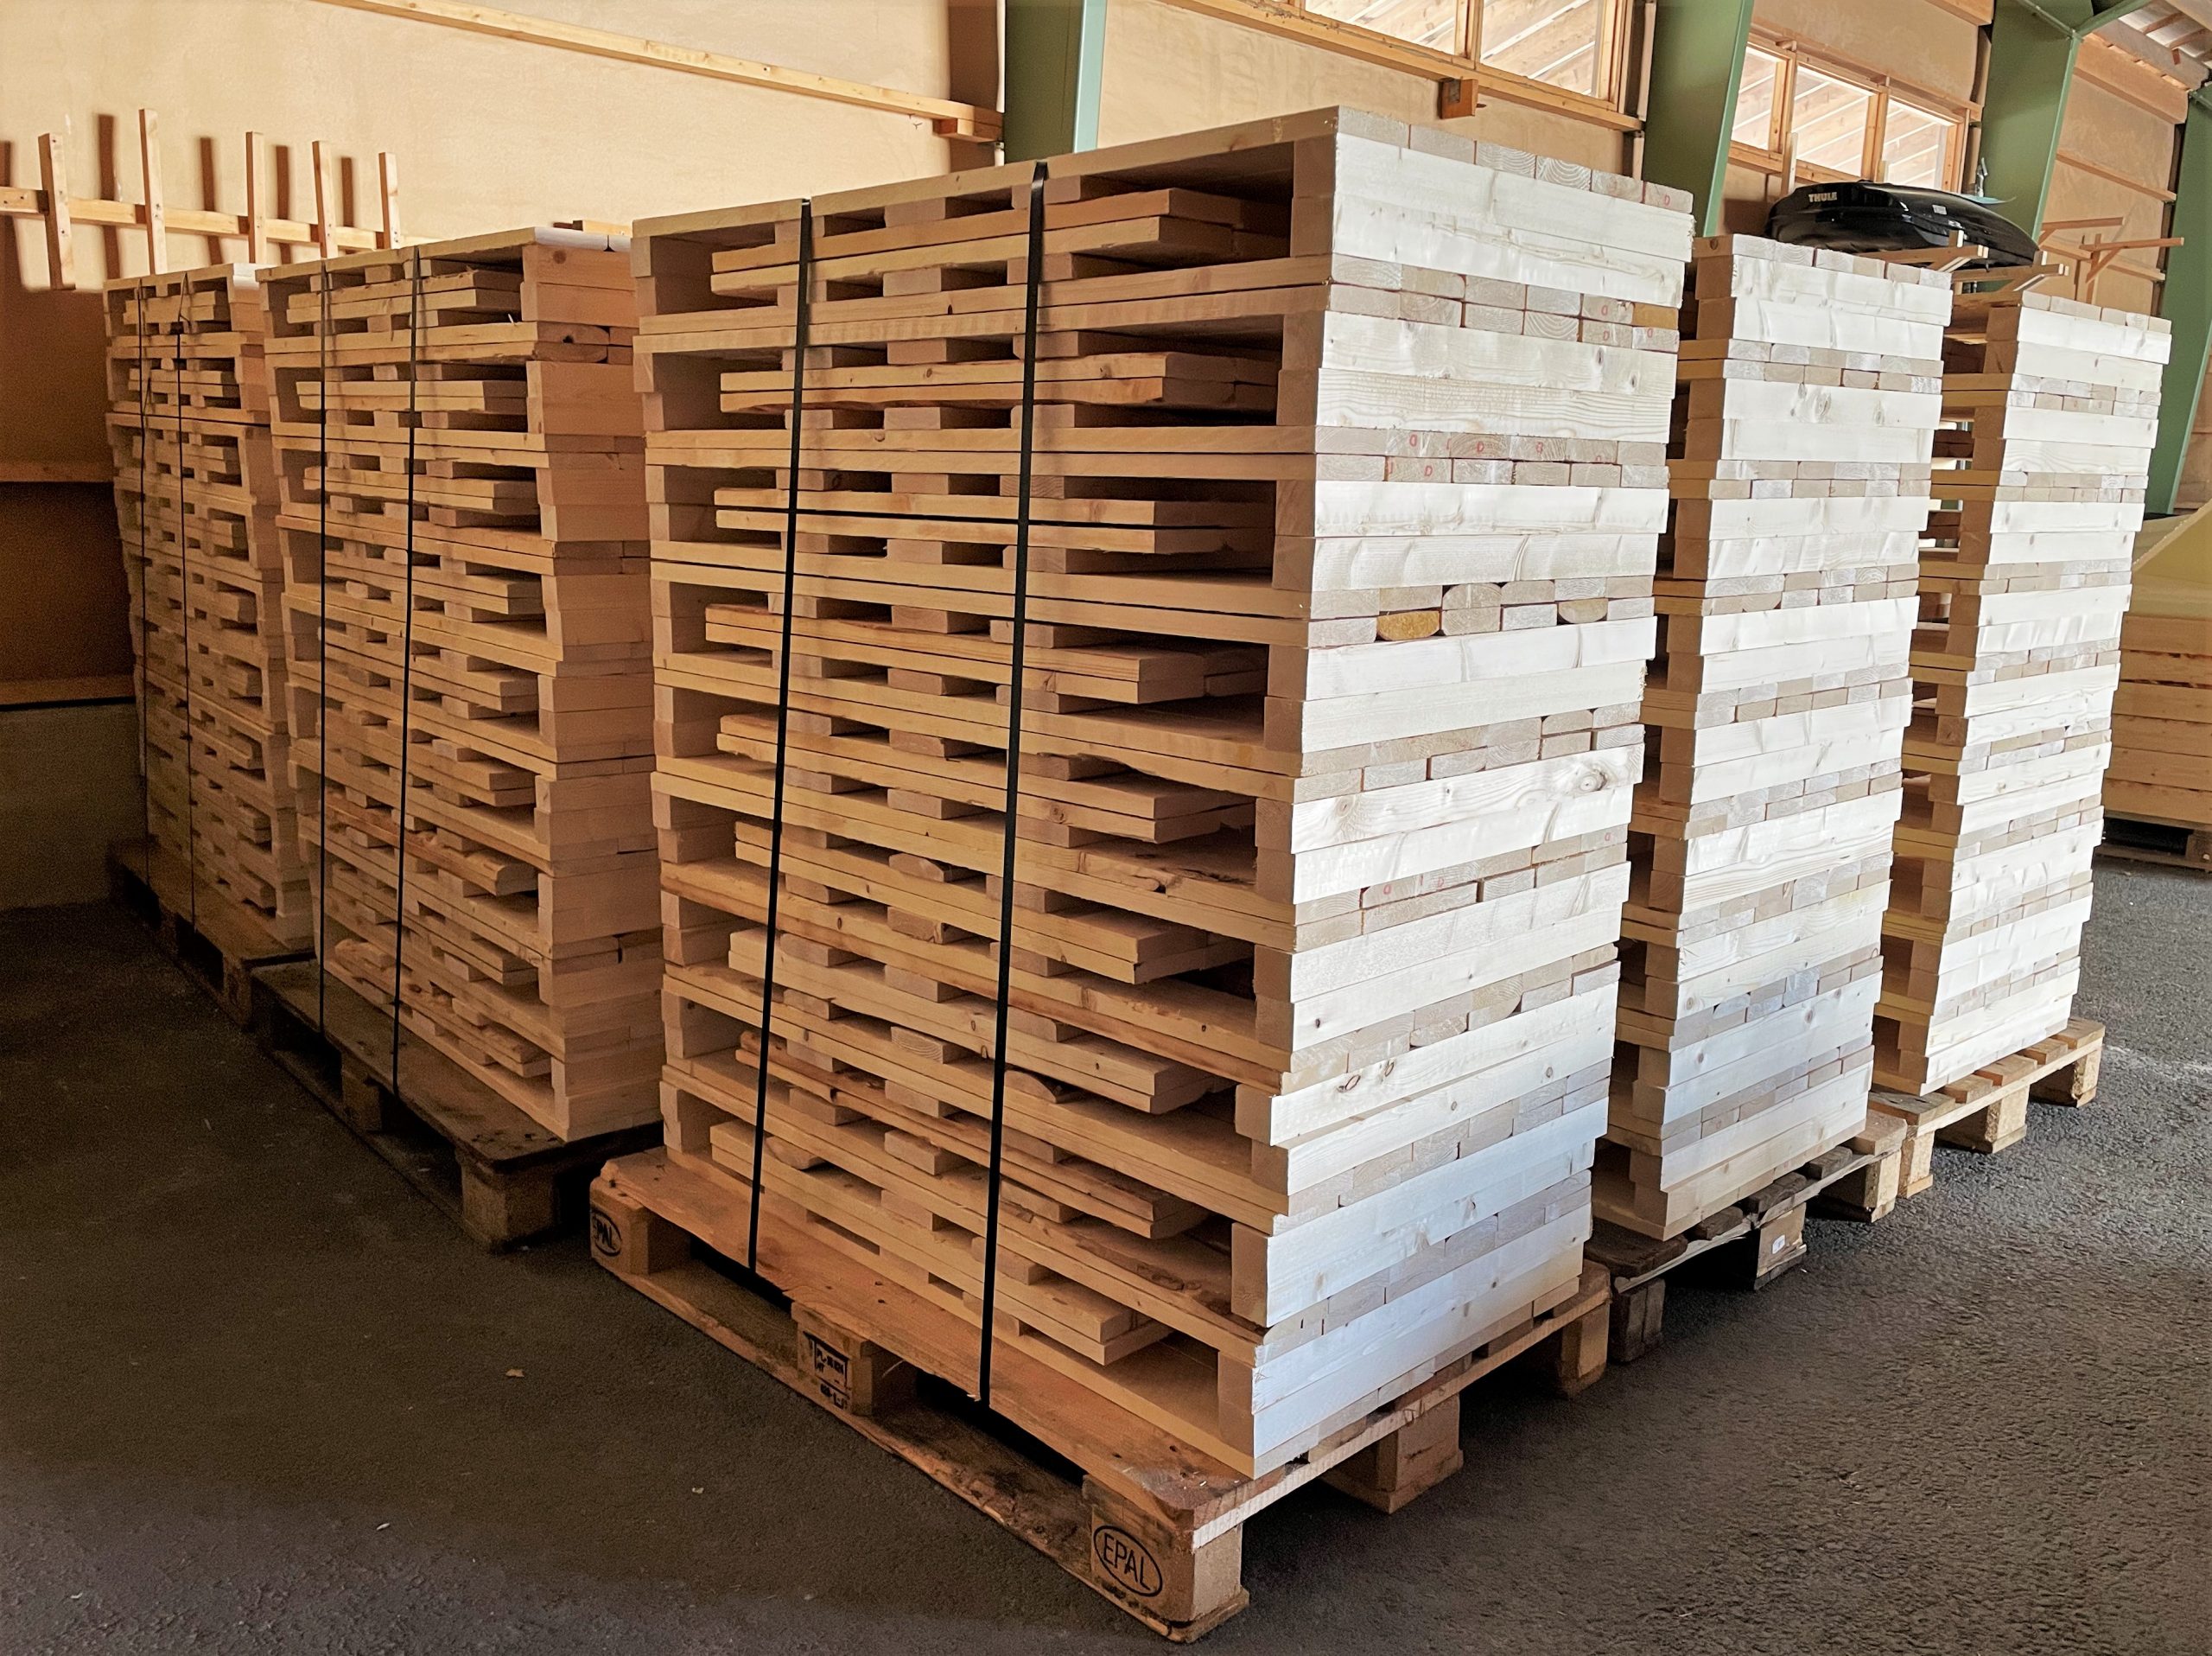 Palsatech's wooden containers for more efficient storage - Palsatech